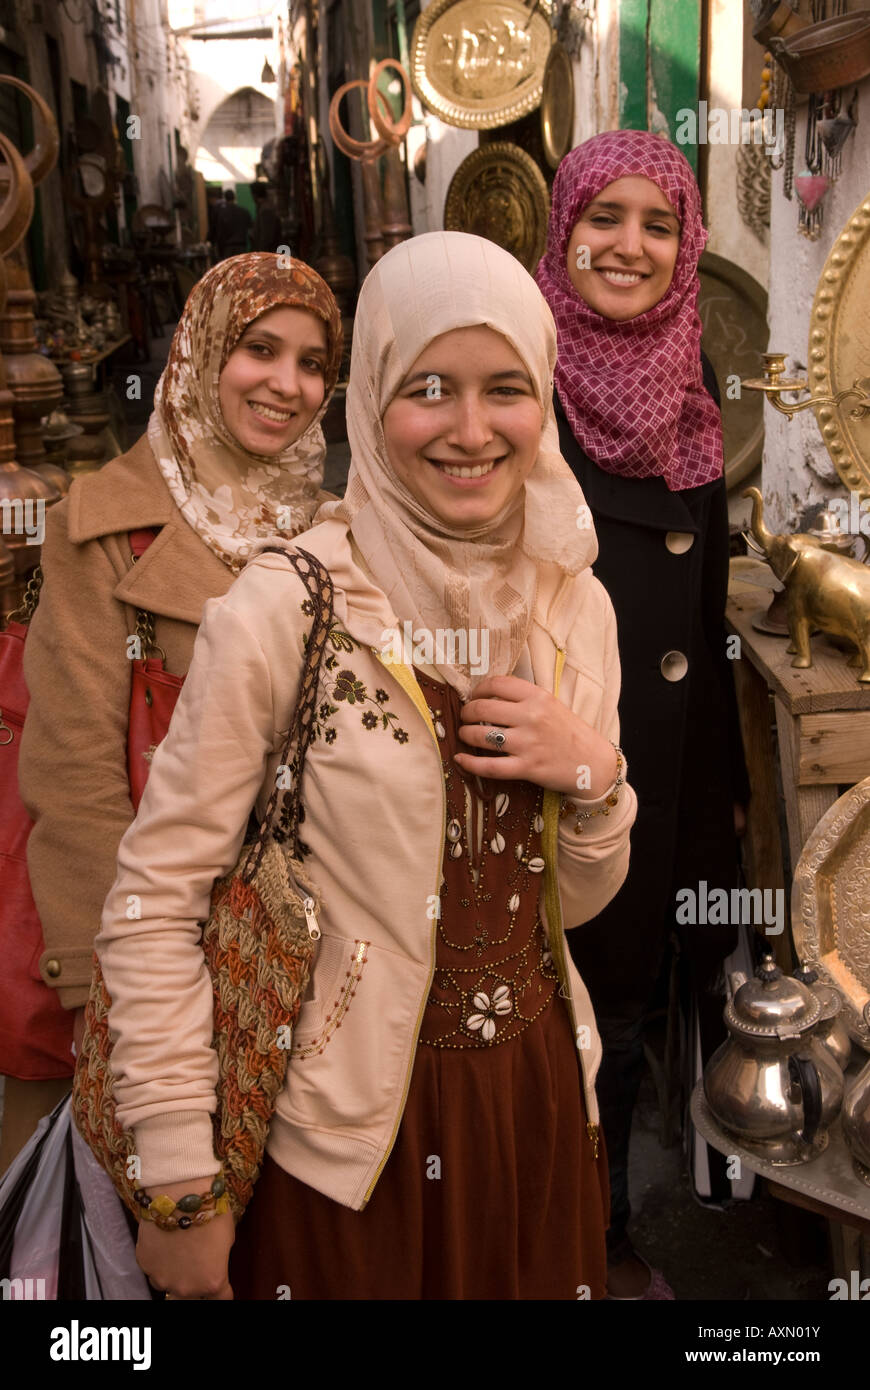 Three young Libyan women in the copper souq of the old town or medina Tripoli Libya Stock Photo